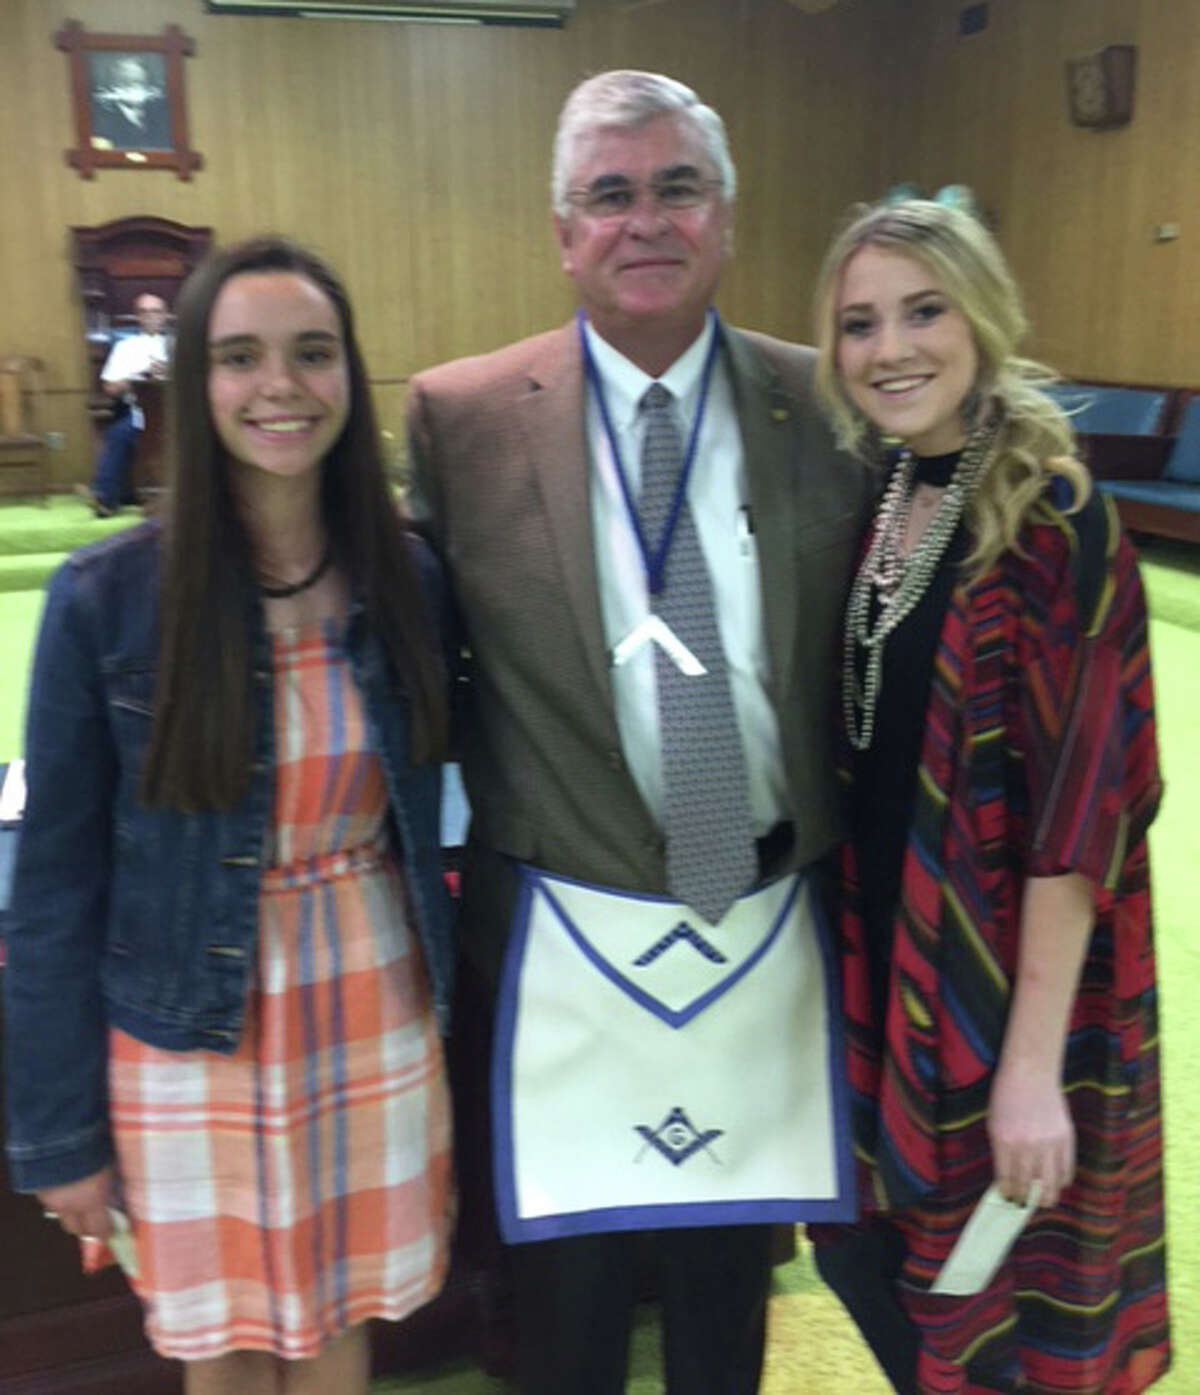 Plainview Masonic Lodge #709 has awarded $500 scholarships to two Plainview graduating seniors, Breana Roden (left) and Colti Wright. Making the presentation is Worshipful Master Ernie Gandy.